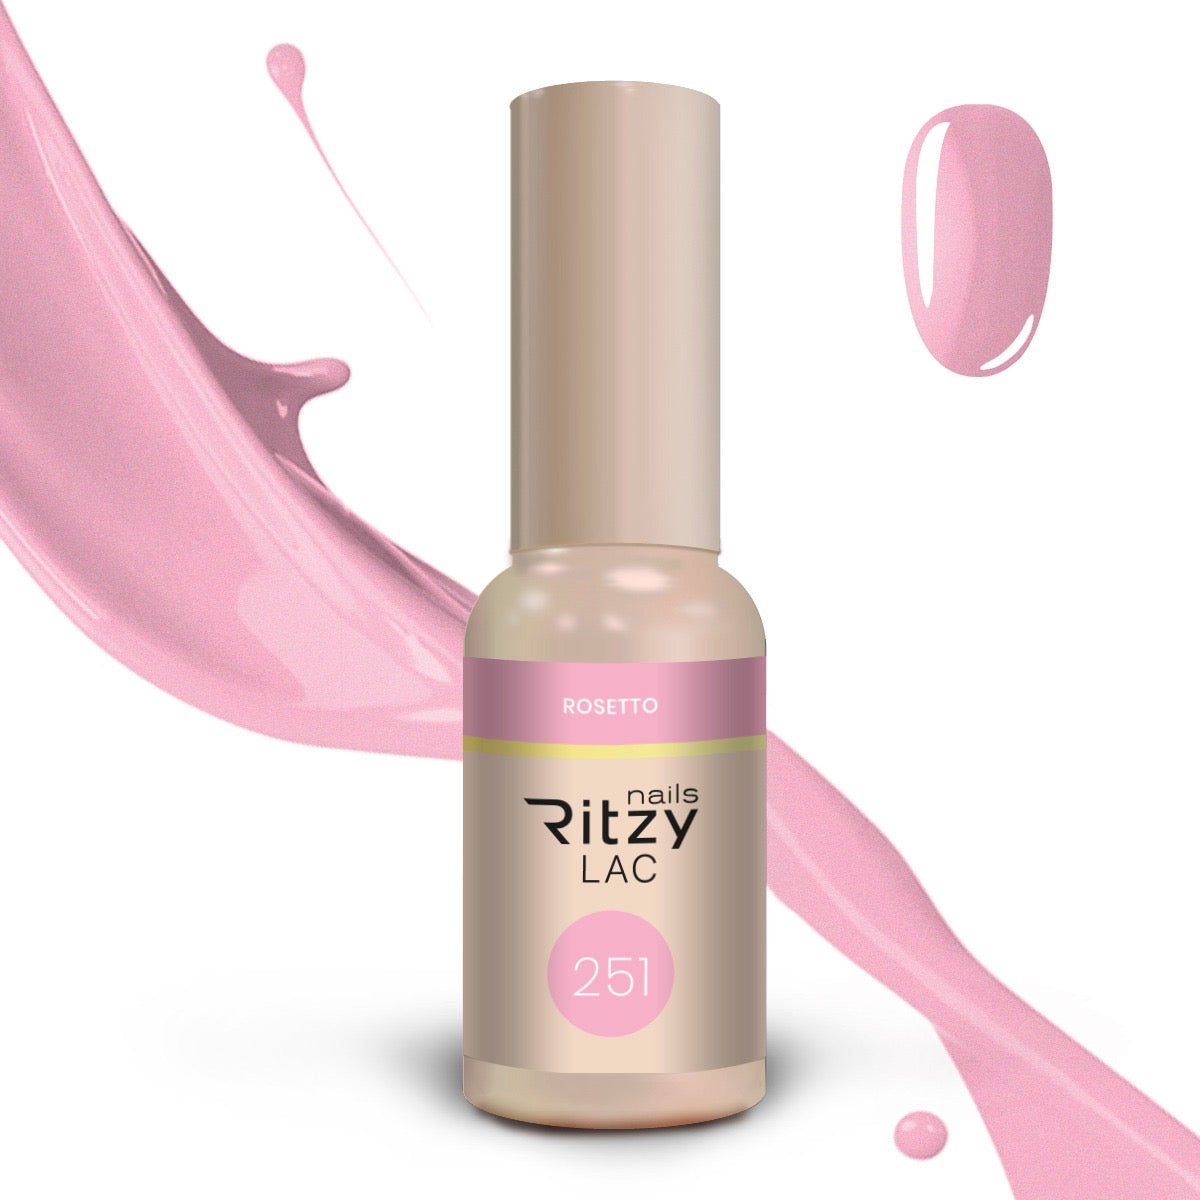 Ritzy Nails “Lipstick” collection of 10 colors x 9ml